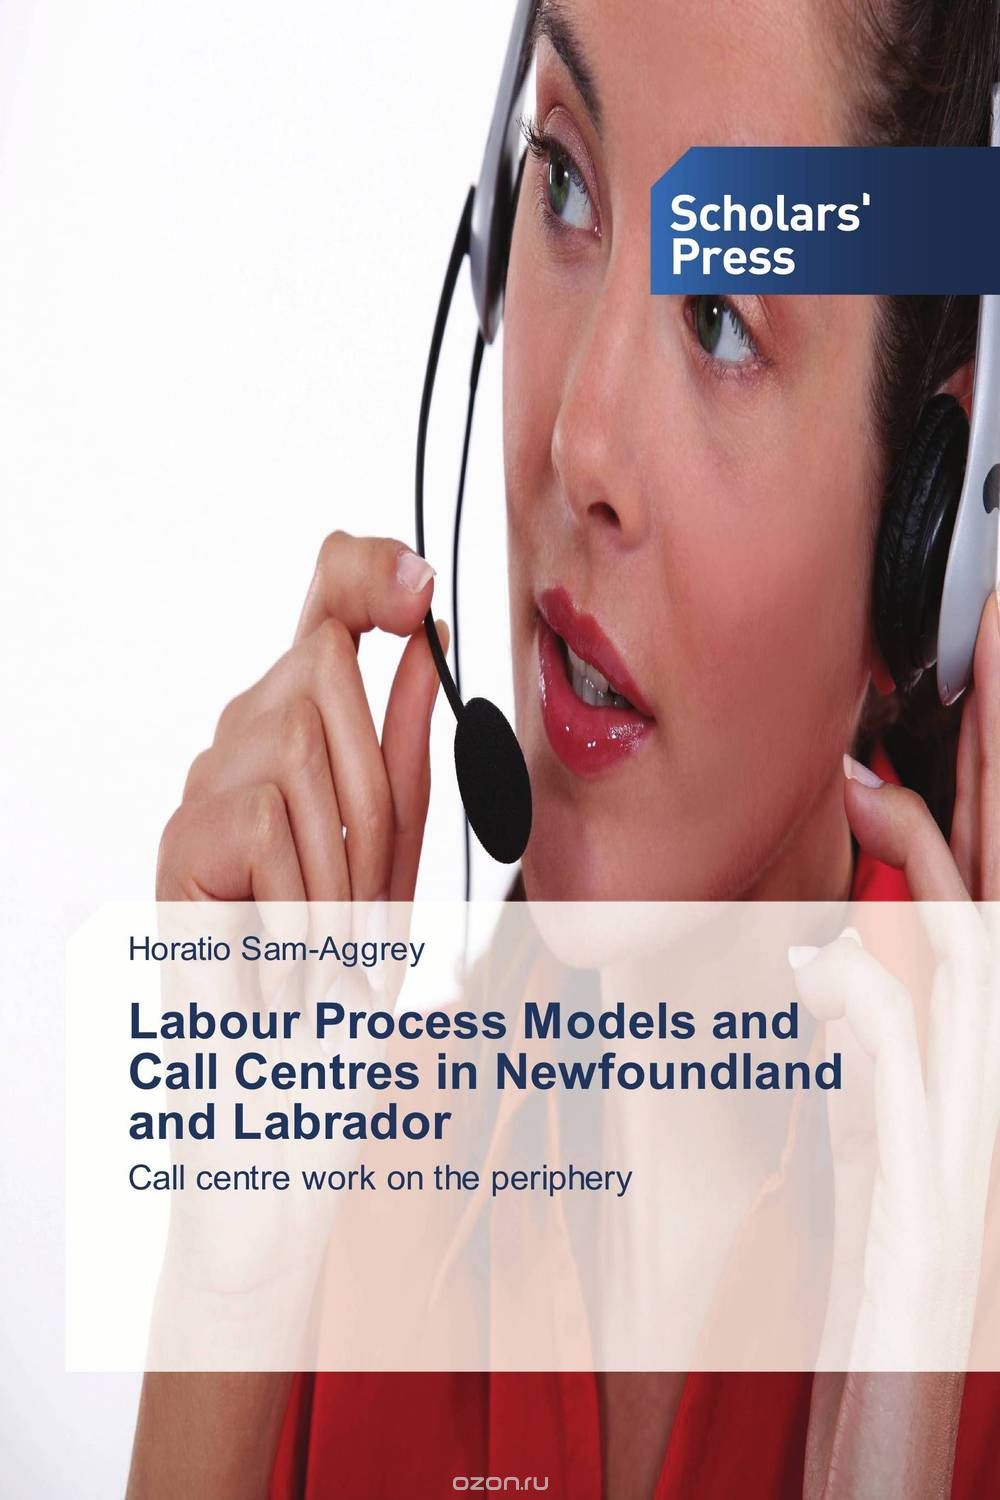 Скачать книгу "Labour Process Models and Call Centres in Newfoundland and Labrador"